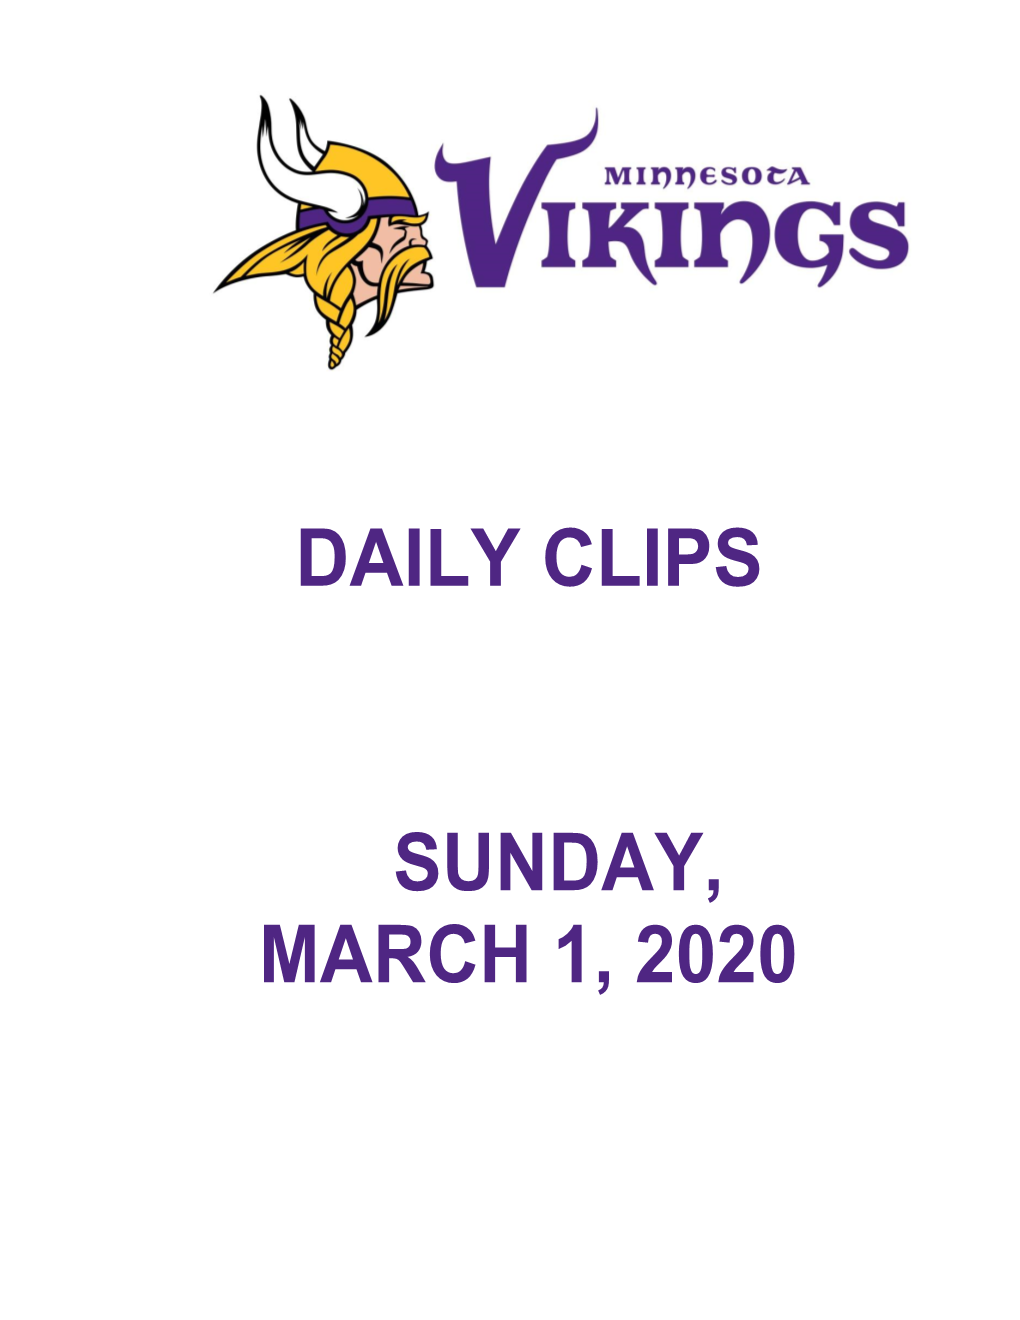 Daily Clips Sunday, March 1, 2020